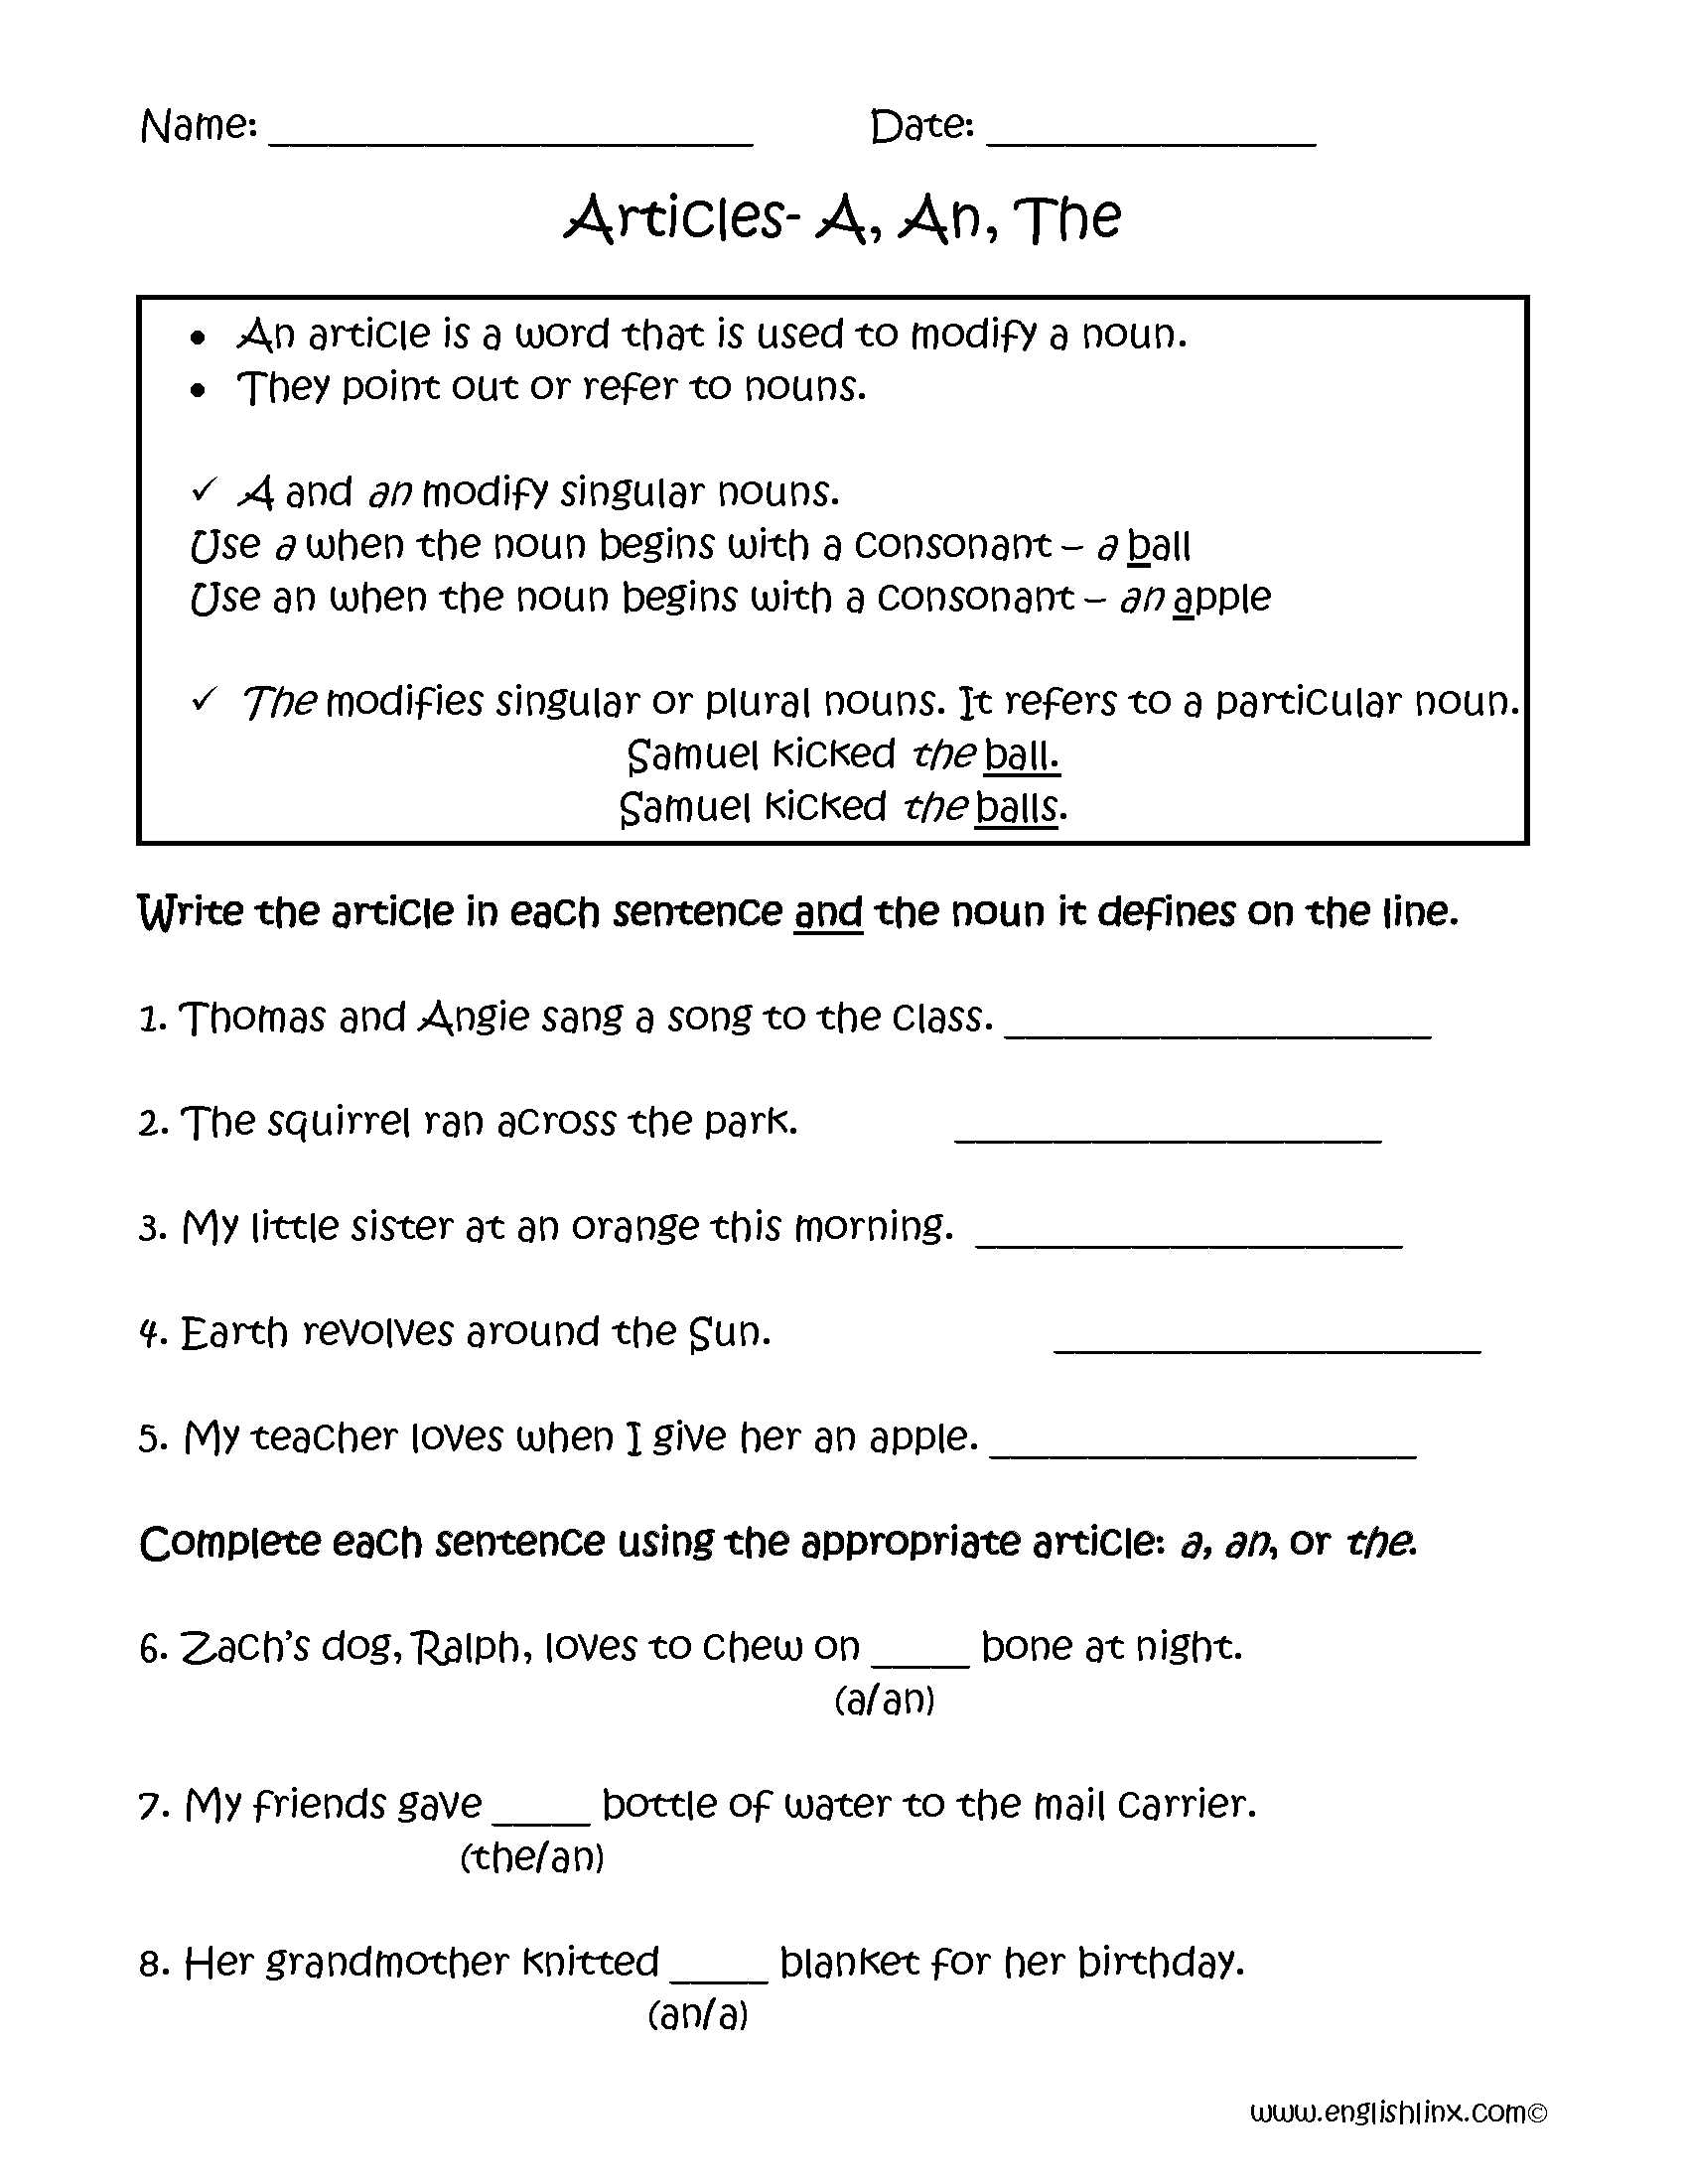 Articles Of Confederation Worksheet Answers and Articles Worksheets Pdf Math English Grammar Exercises with Answers